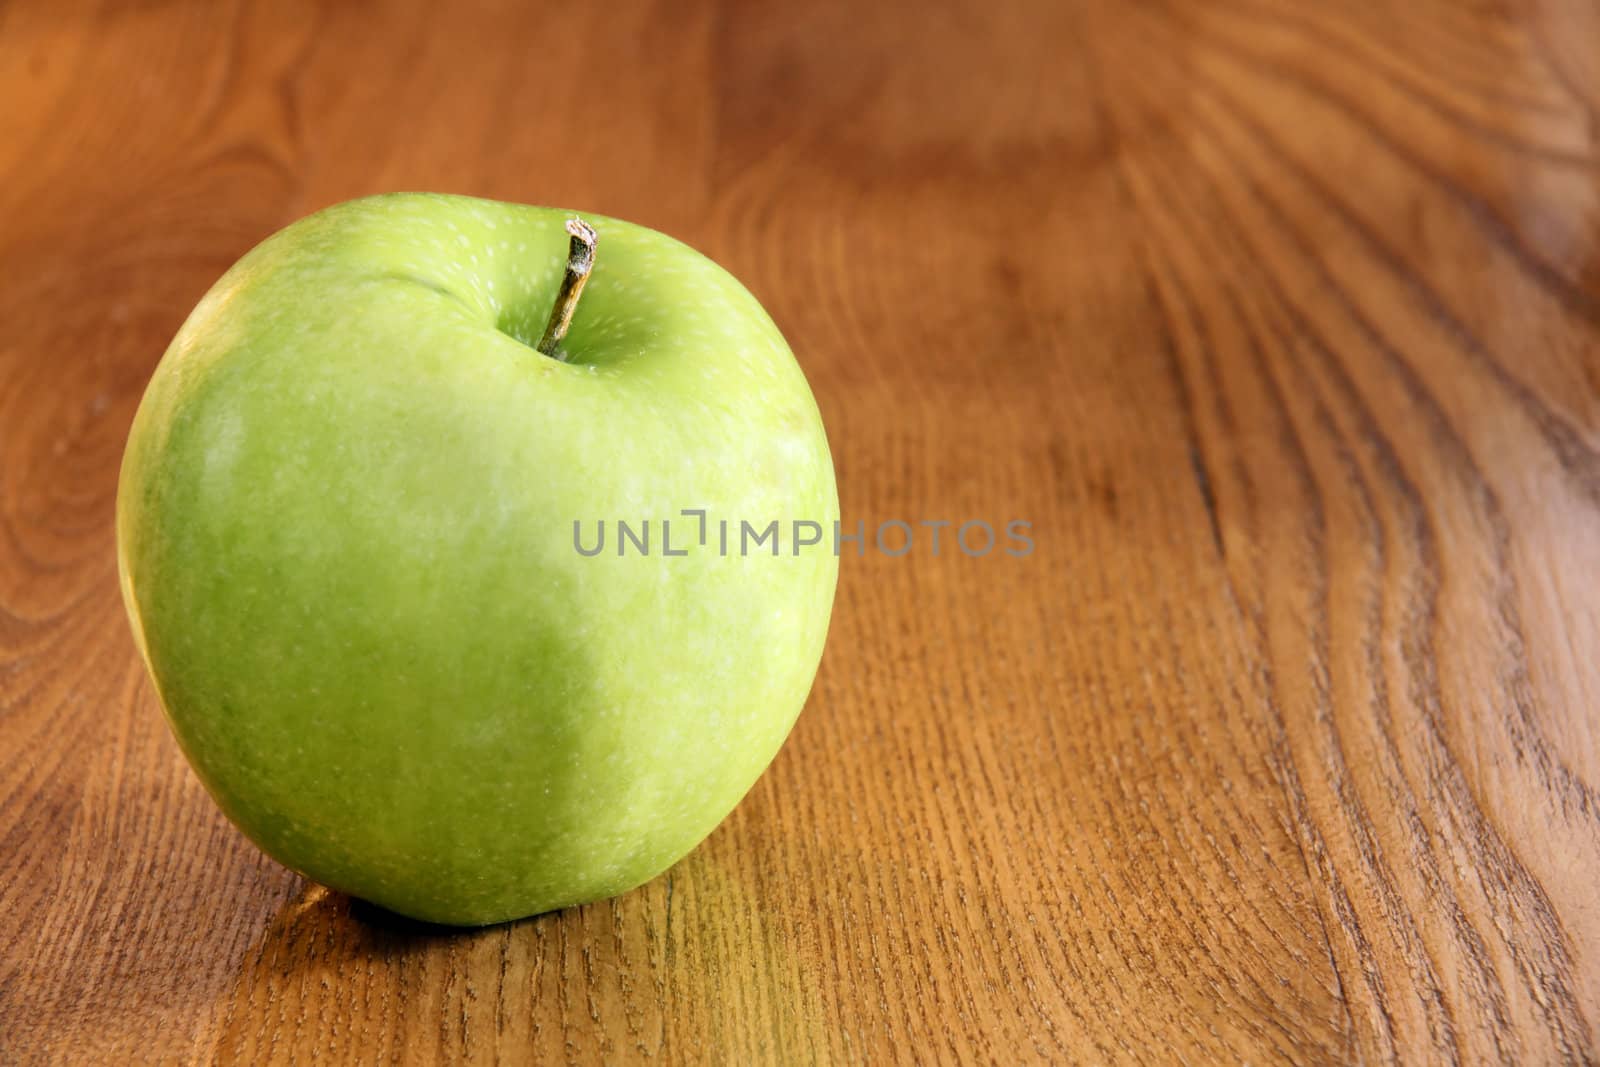 Granny smith apple on table by Mirage3